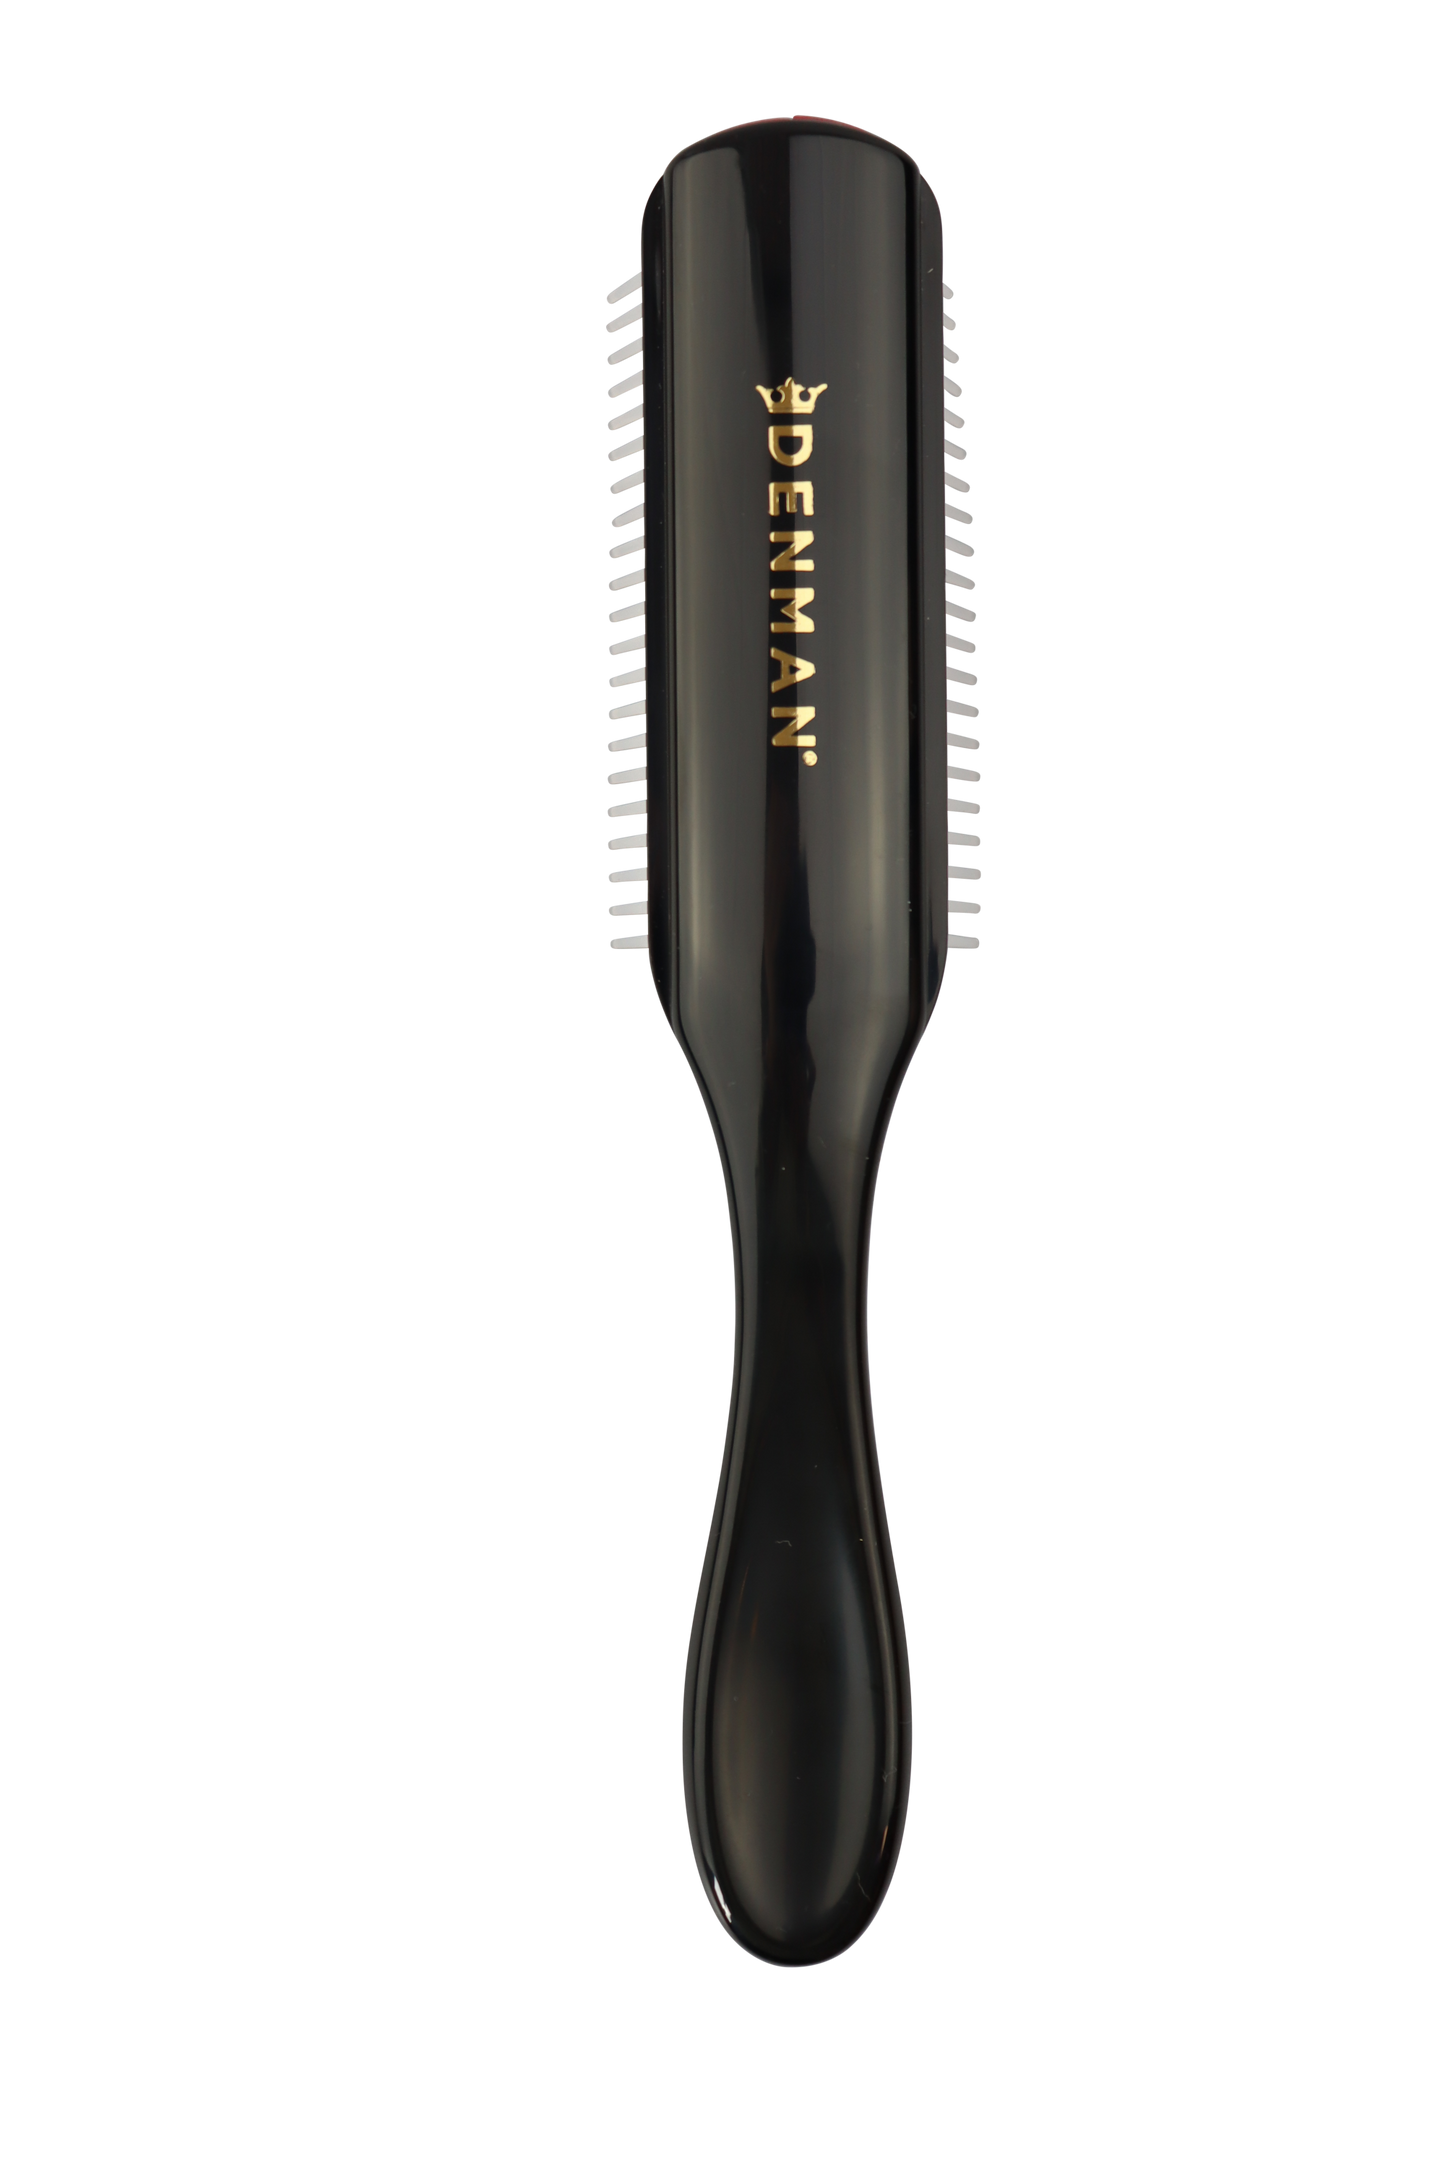 Denman Hair Brush for Curly Hair D3 (Black) 7 Row Classic Styling Brush for Detangling, Separating, Shaping and Defining Curls